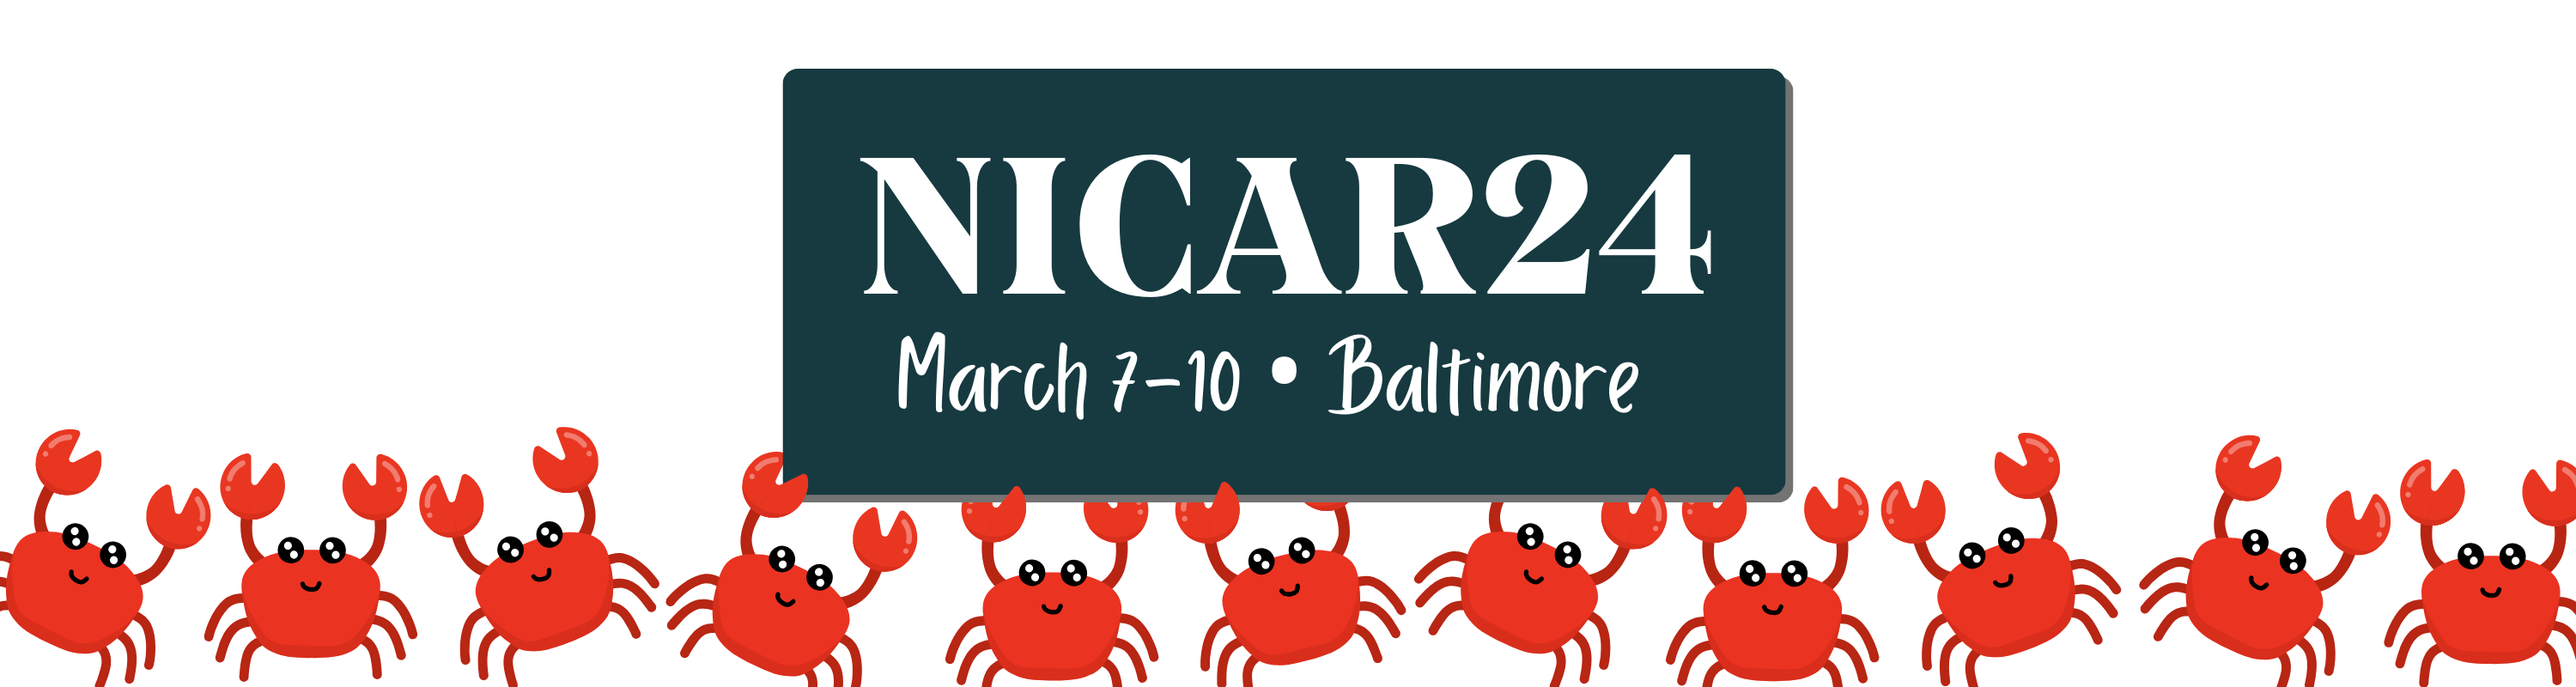 Main page for the NICAR 2024 conference, March 7-10, 2024 | Baltimore